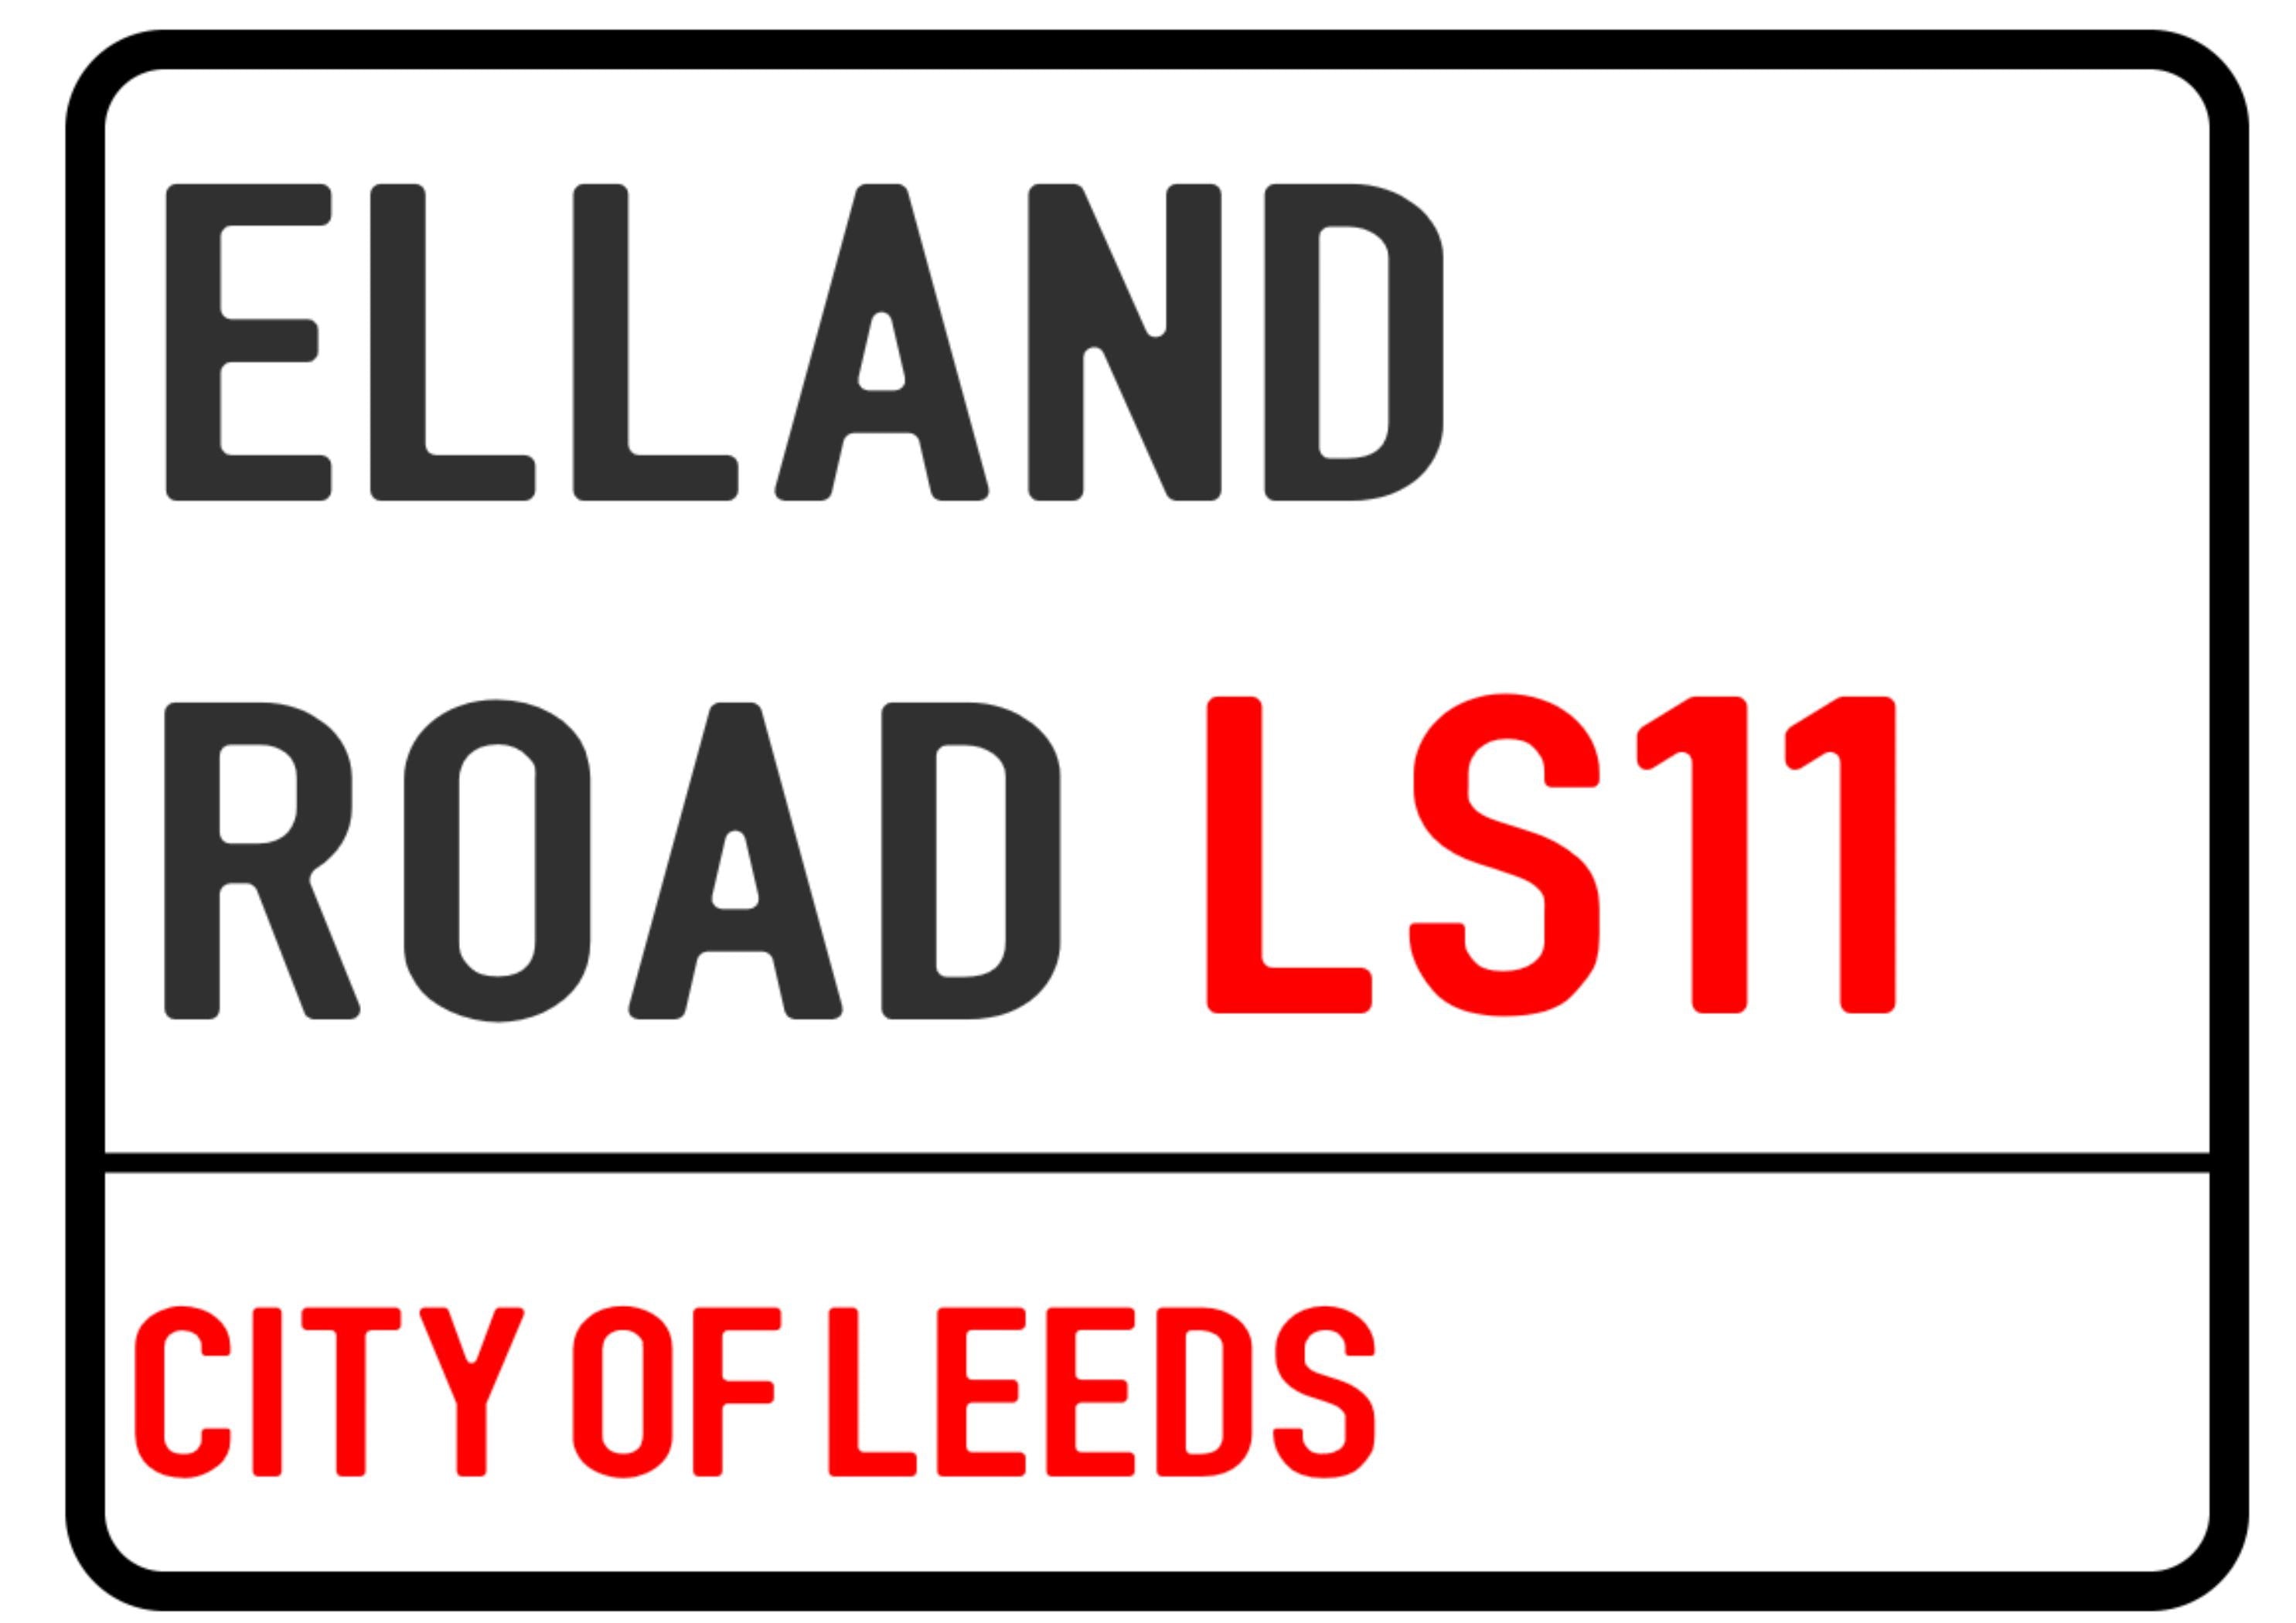 A4 cake topper with the Leeds Football Club Street Sign design for Elland Road